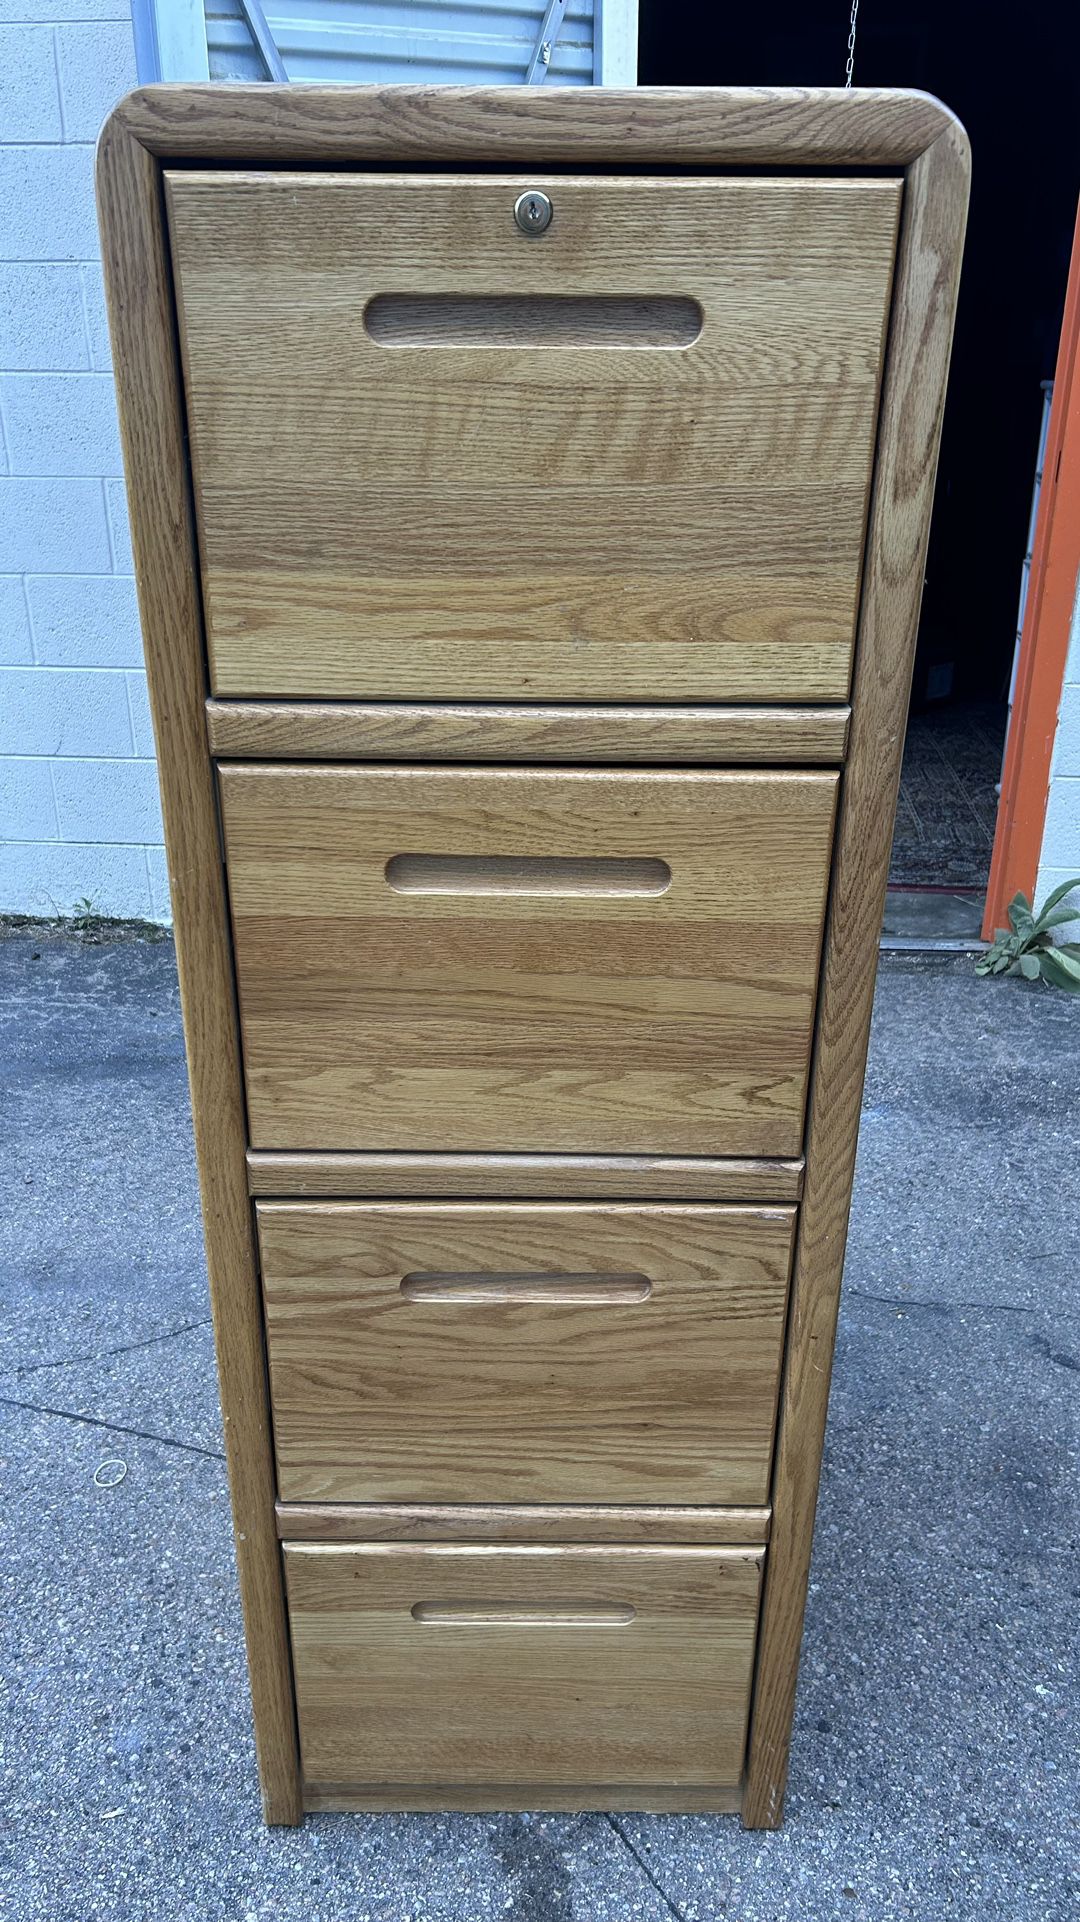 vintage wooden file cabinet 4 drawers tall chest W20”*D24”*H59”no key(address in description)